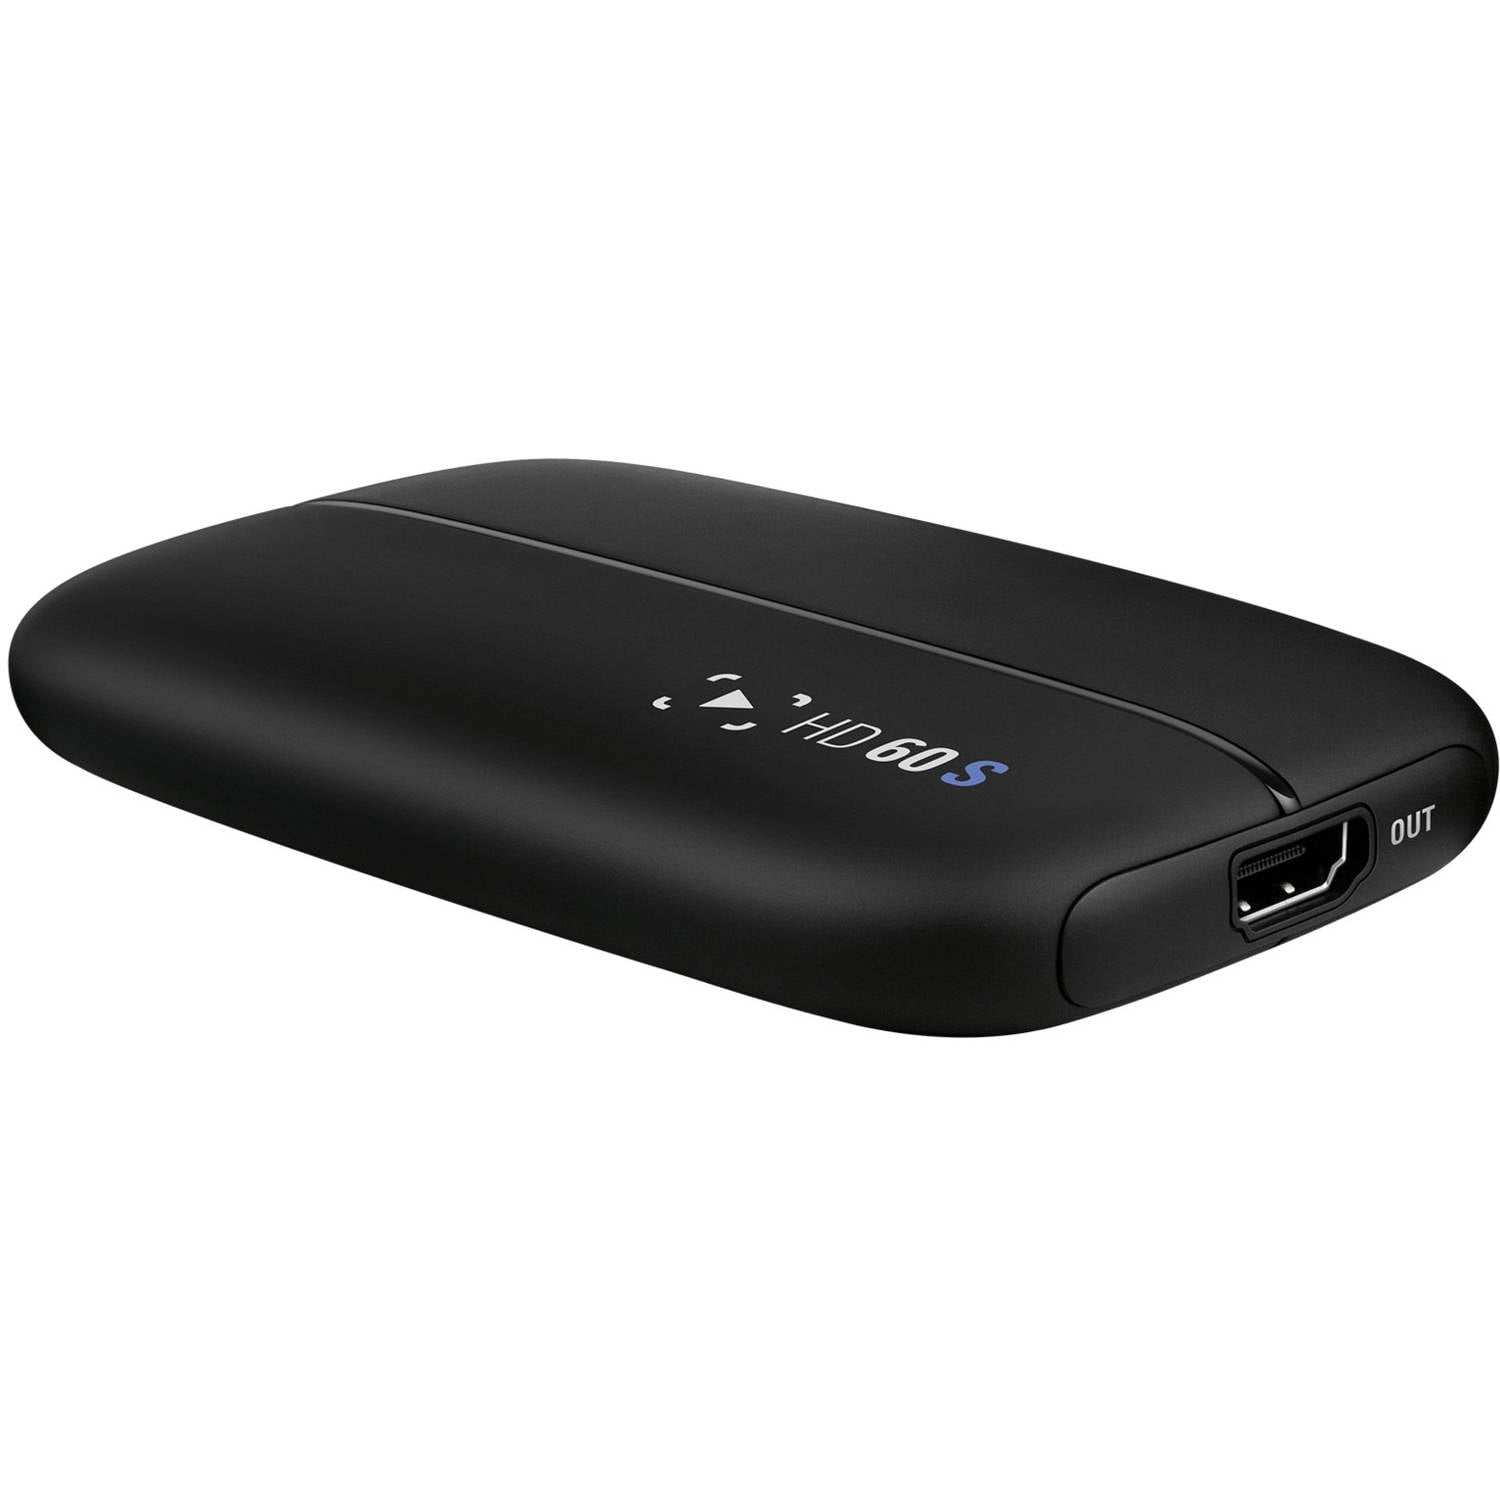 Elgato Game Capture HD60 S - Stream and Record in 1080p60, for PlayStation  4, Xbox One & Xbox 360